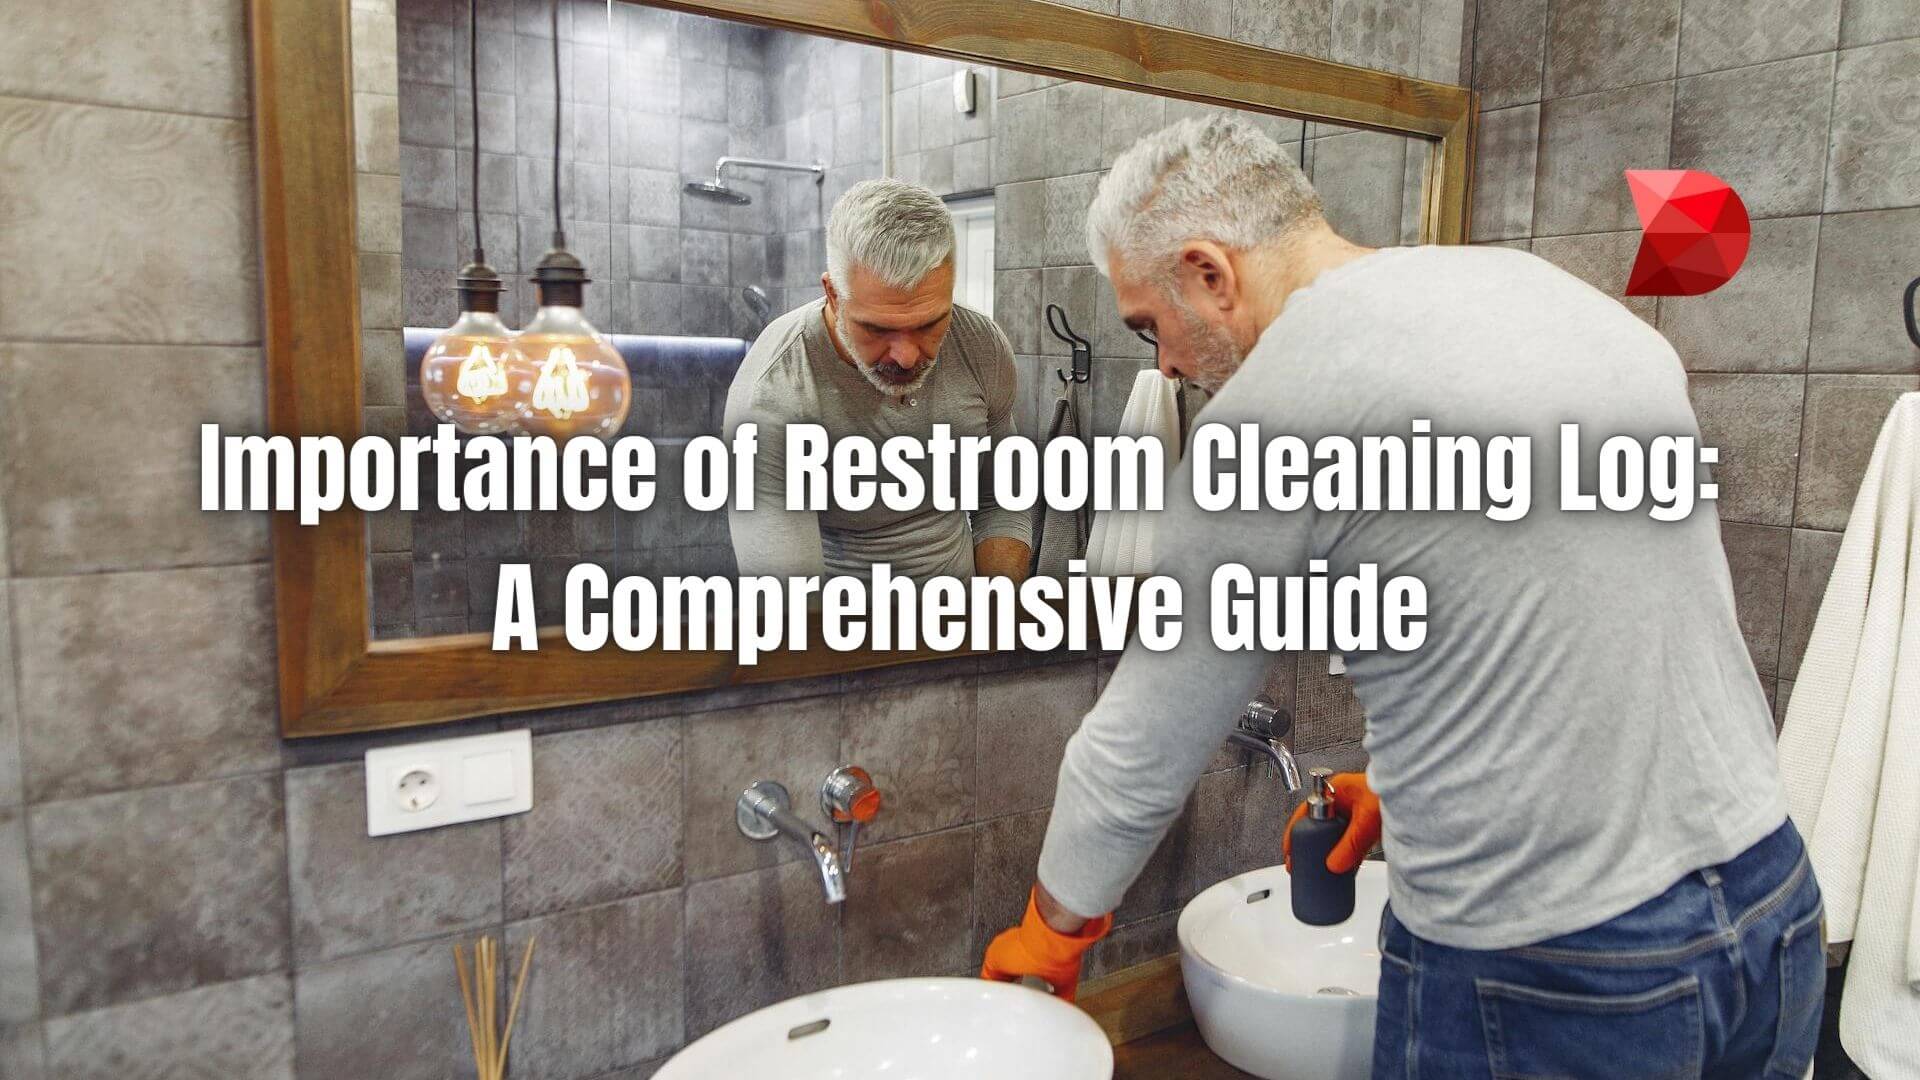 Keep your facilities pristine and germ-free effortlessly! Discover the ultimate guide to maintaining hygiene with our bathroom cleaning log.